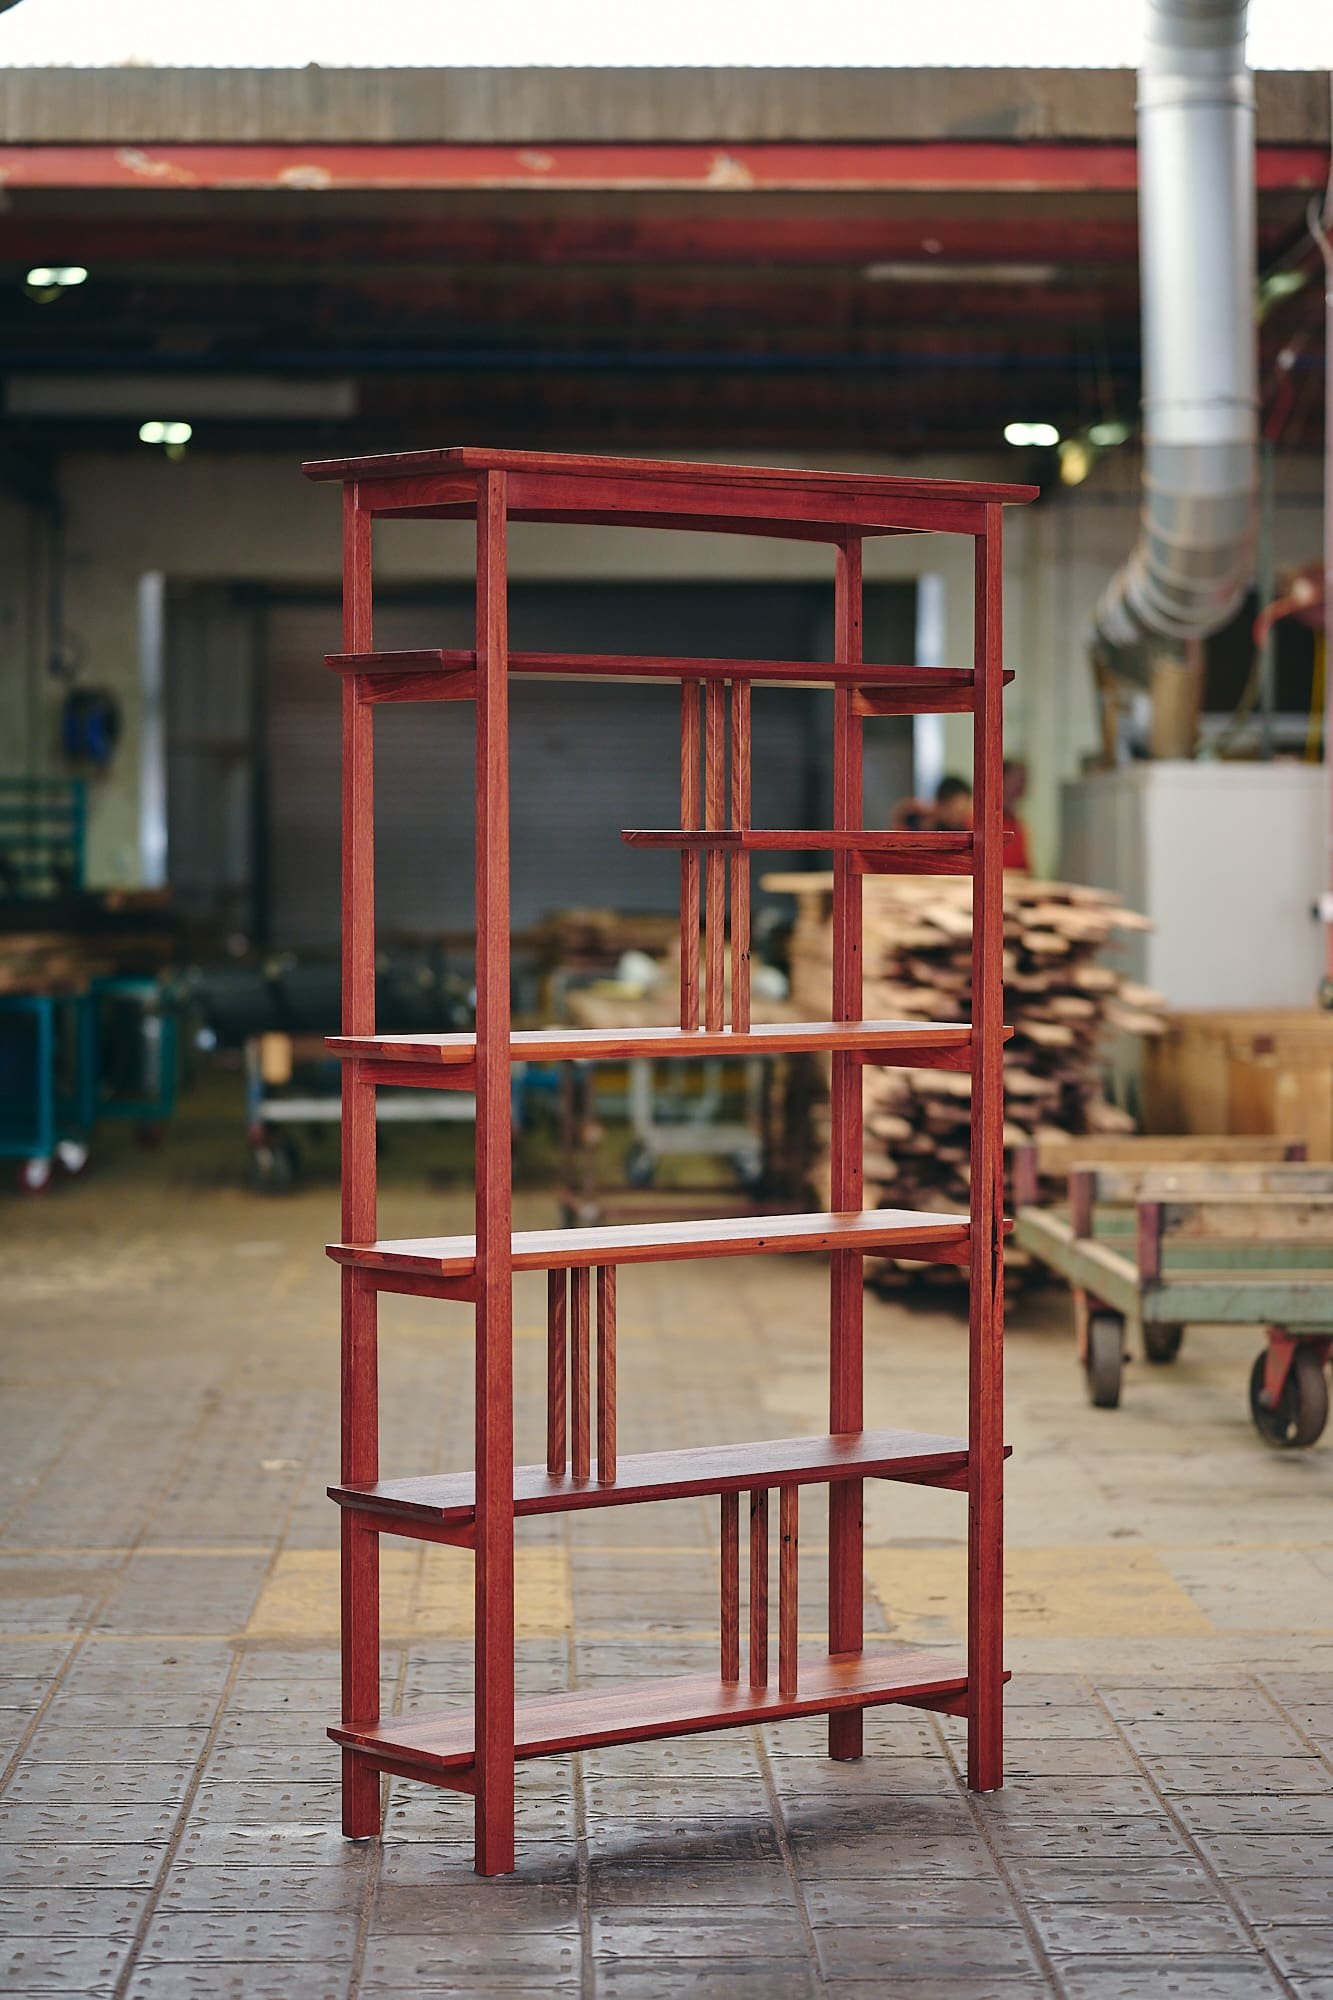 Japanese-style ornamental shelving unit in mixed reds